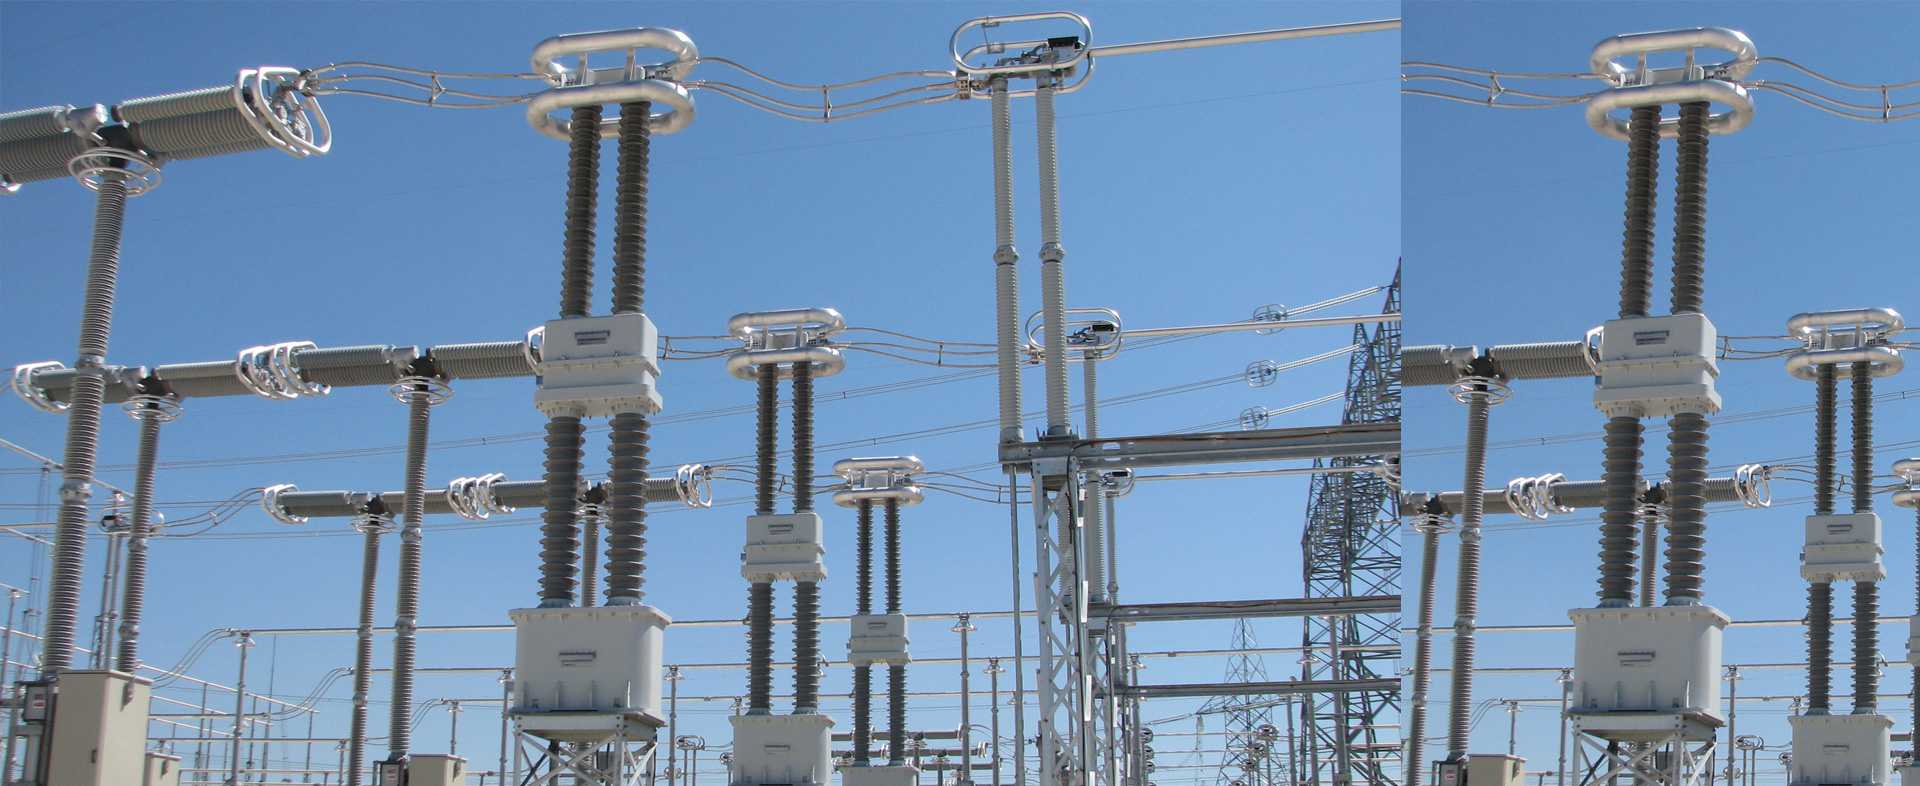 Innovative High Reliability High Voltage Equipment for the Power Grid